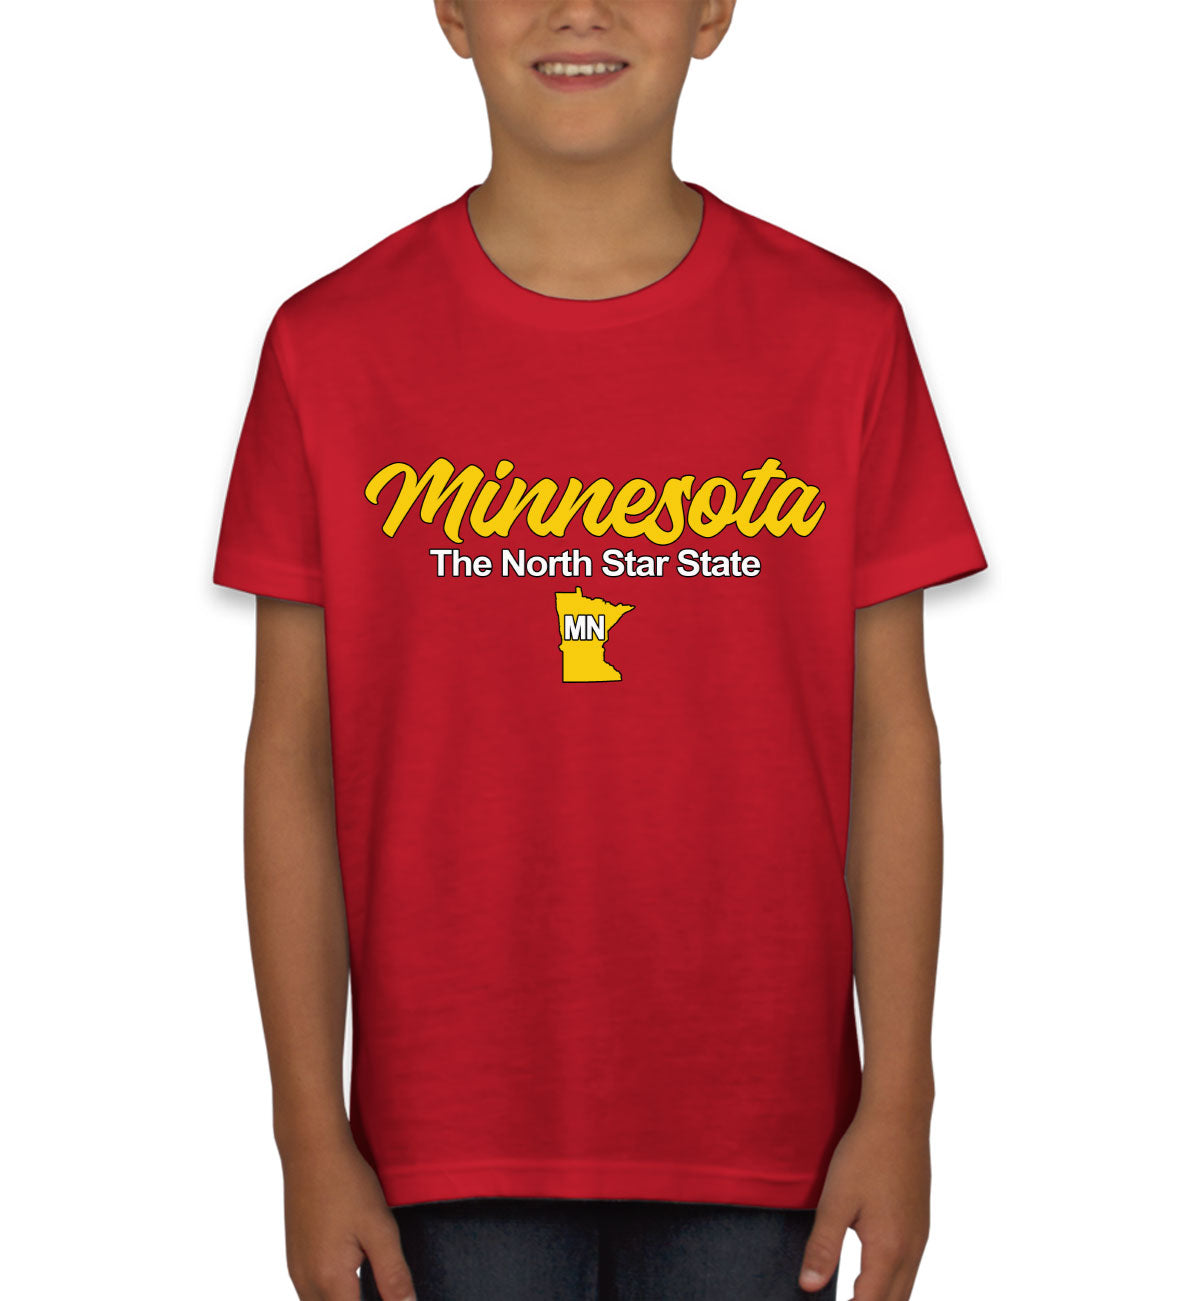 Minnesota The North Star State Youth T-shirt